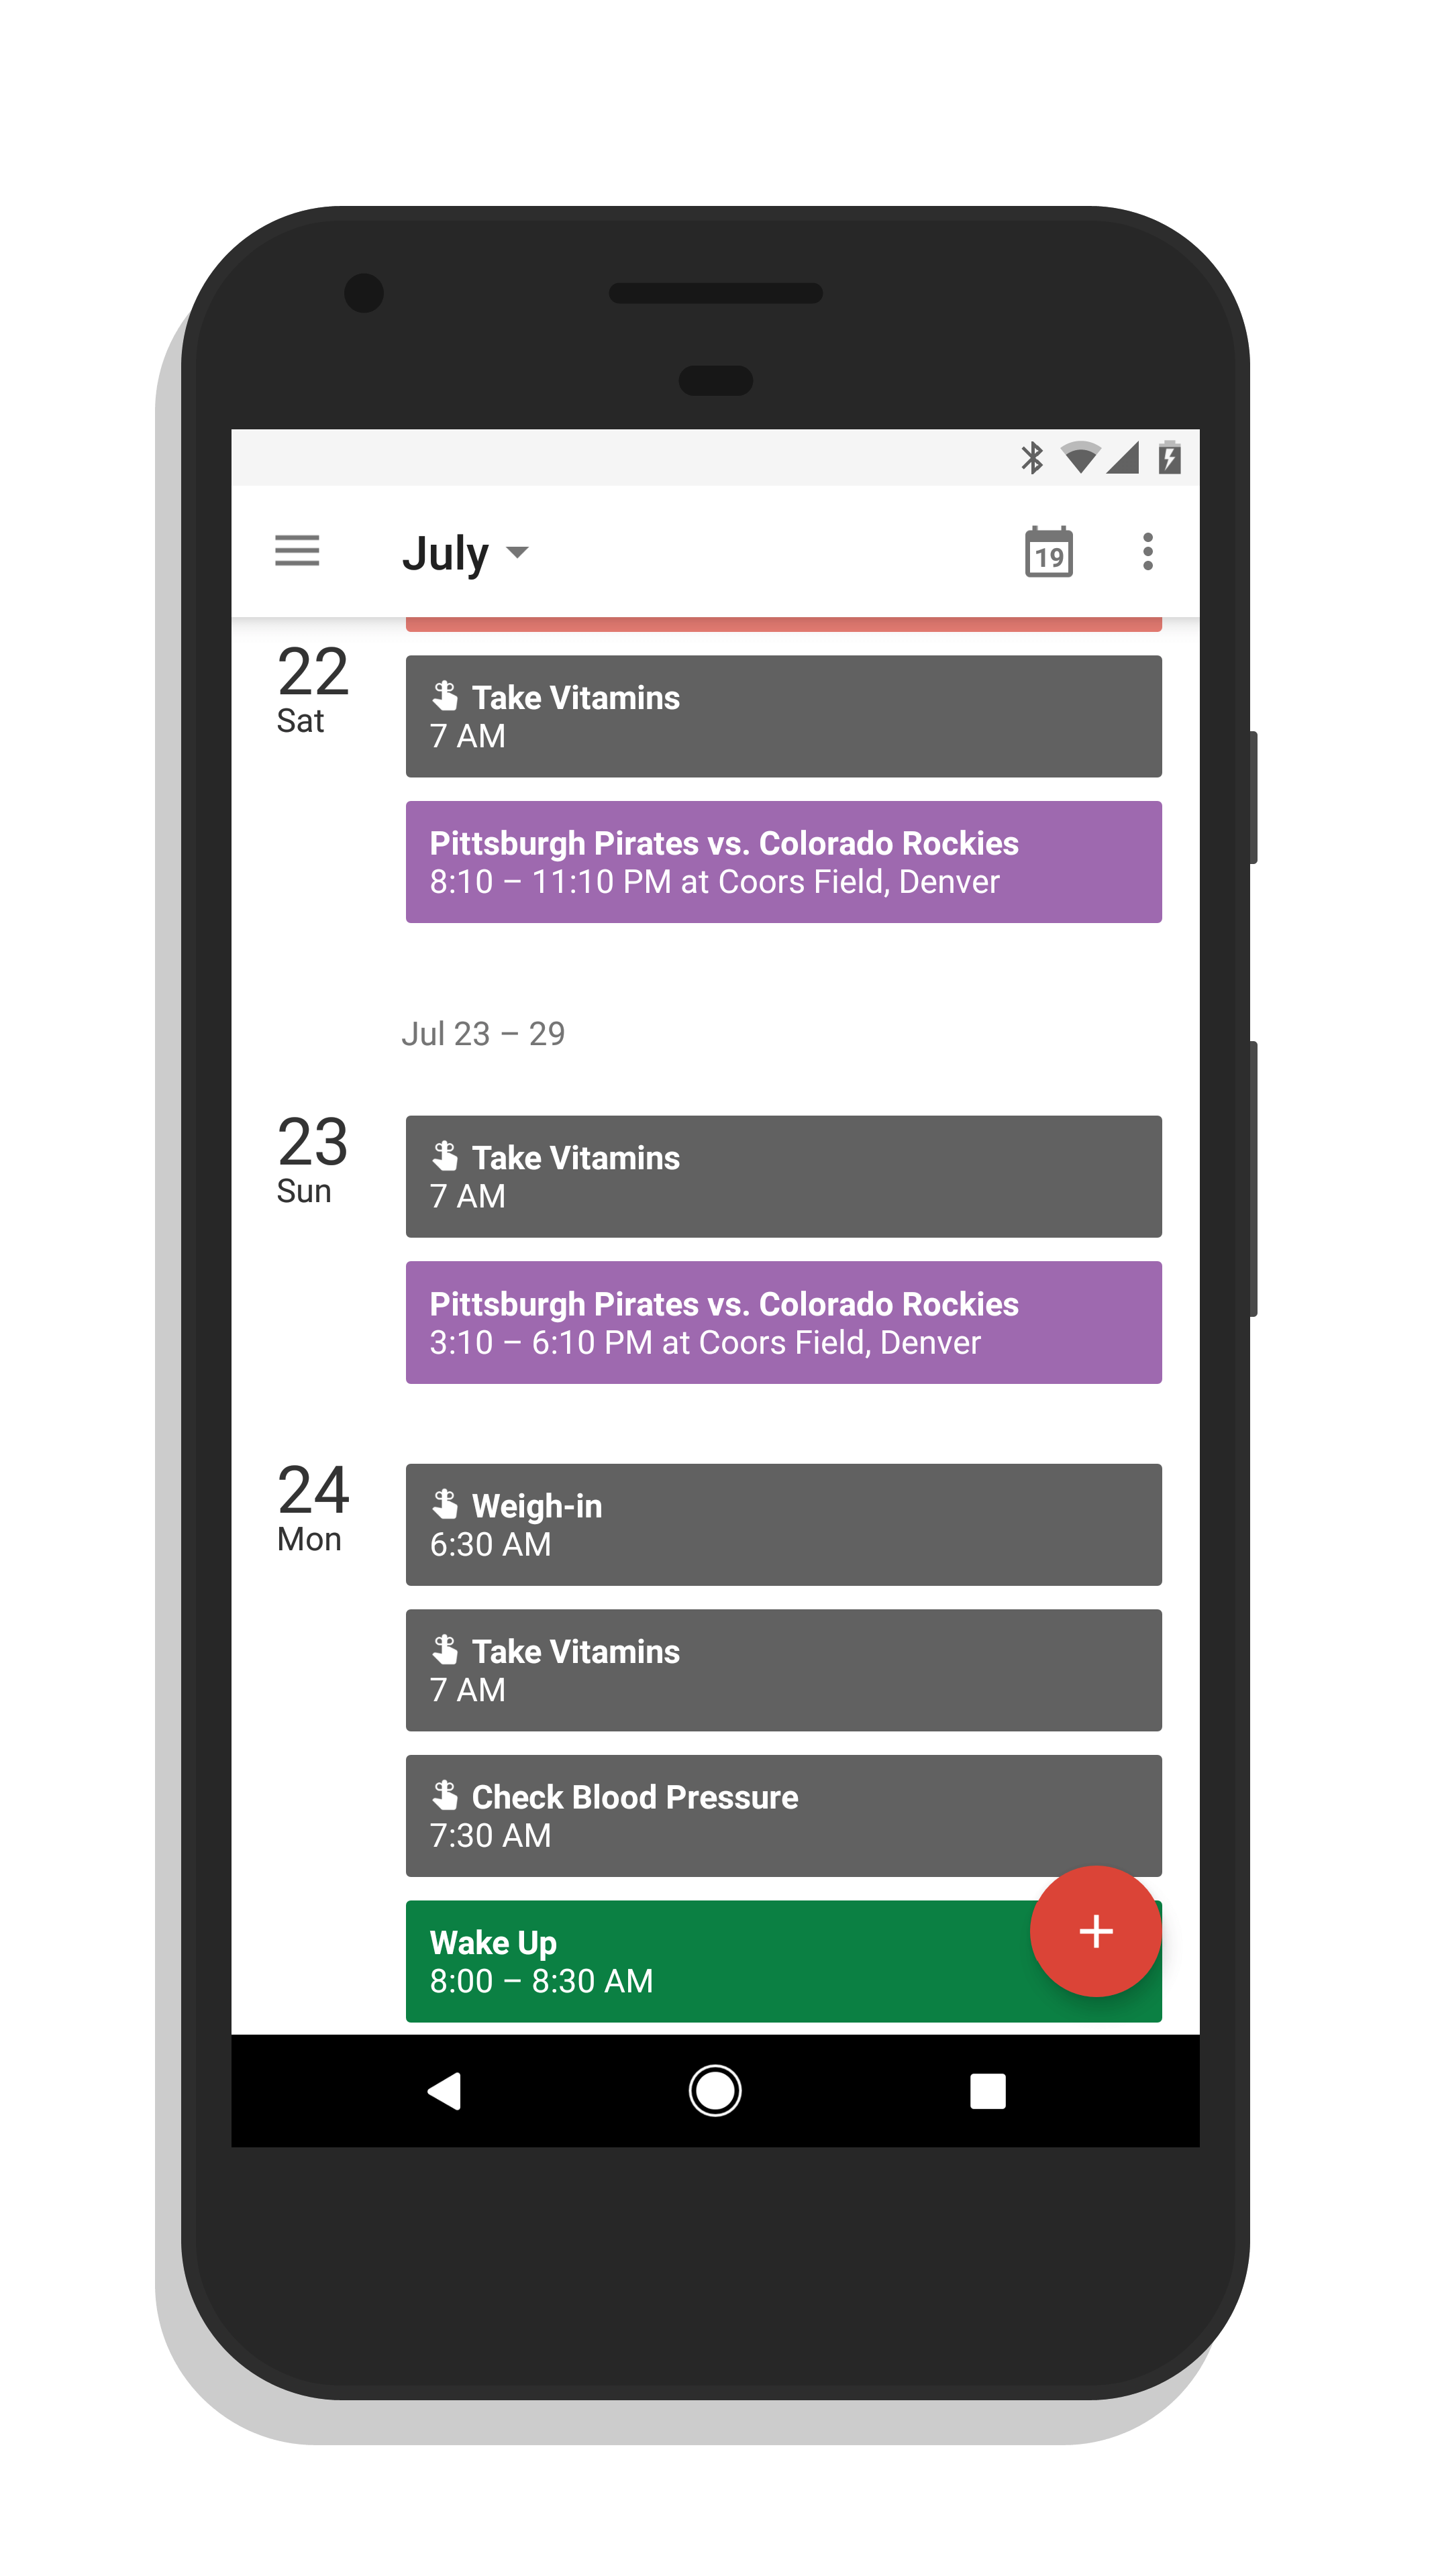 Google Calendar Update Brings Event Drag & Drop to Android